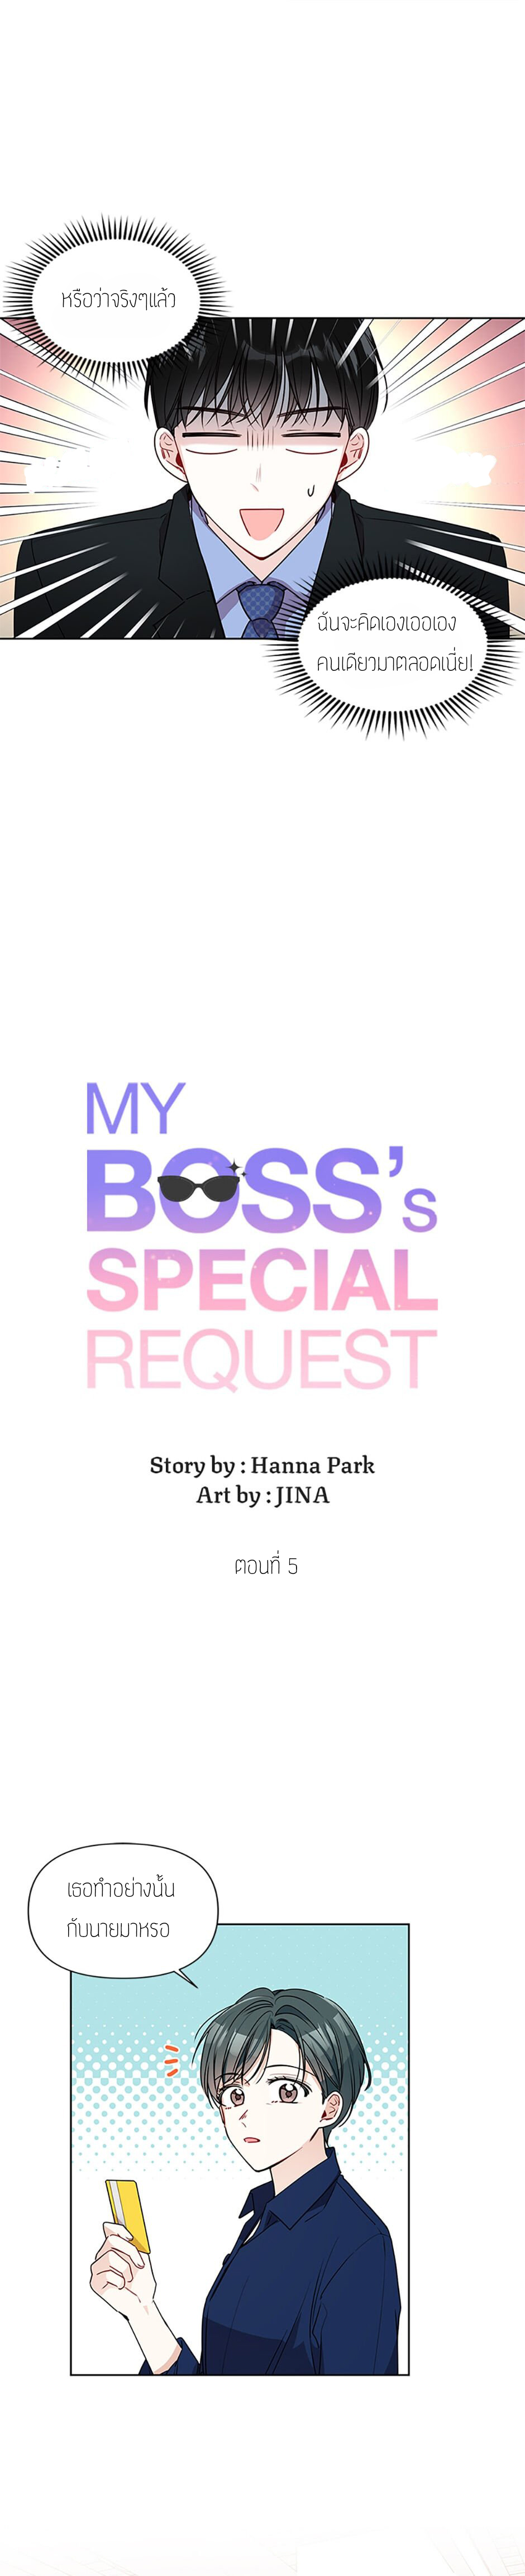 My Boss’s Special Request 5 (4)